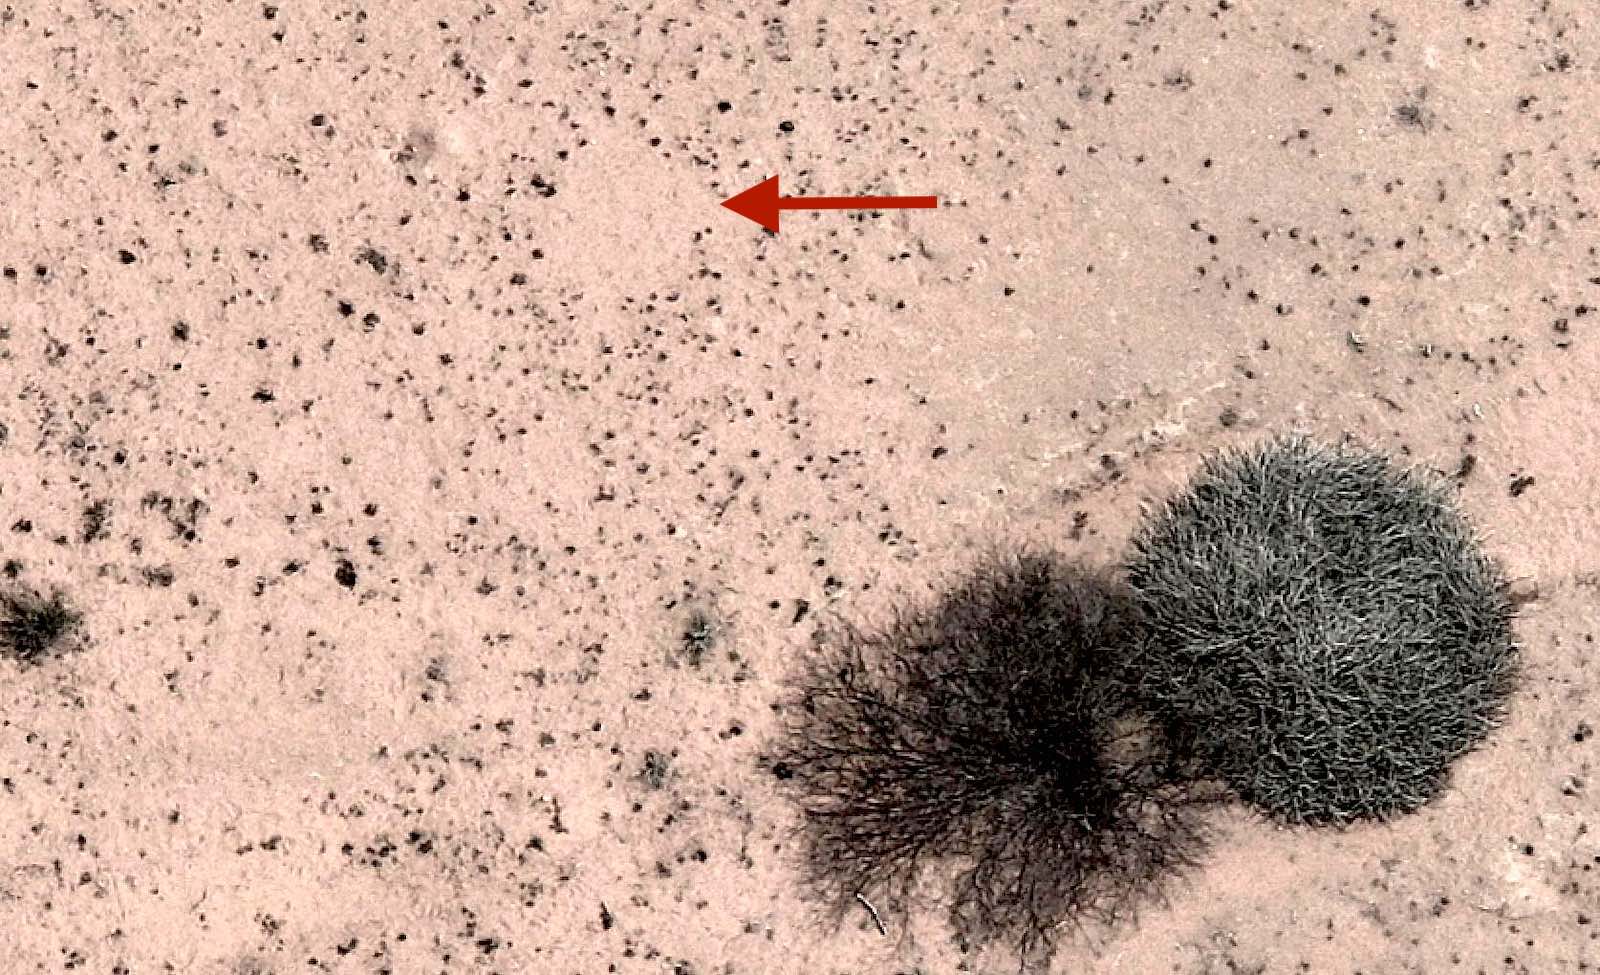 An aerial view showing large euphorbia bushes next to small fairy circles.